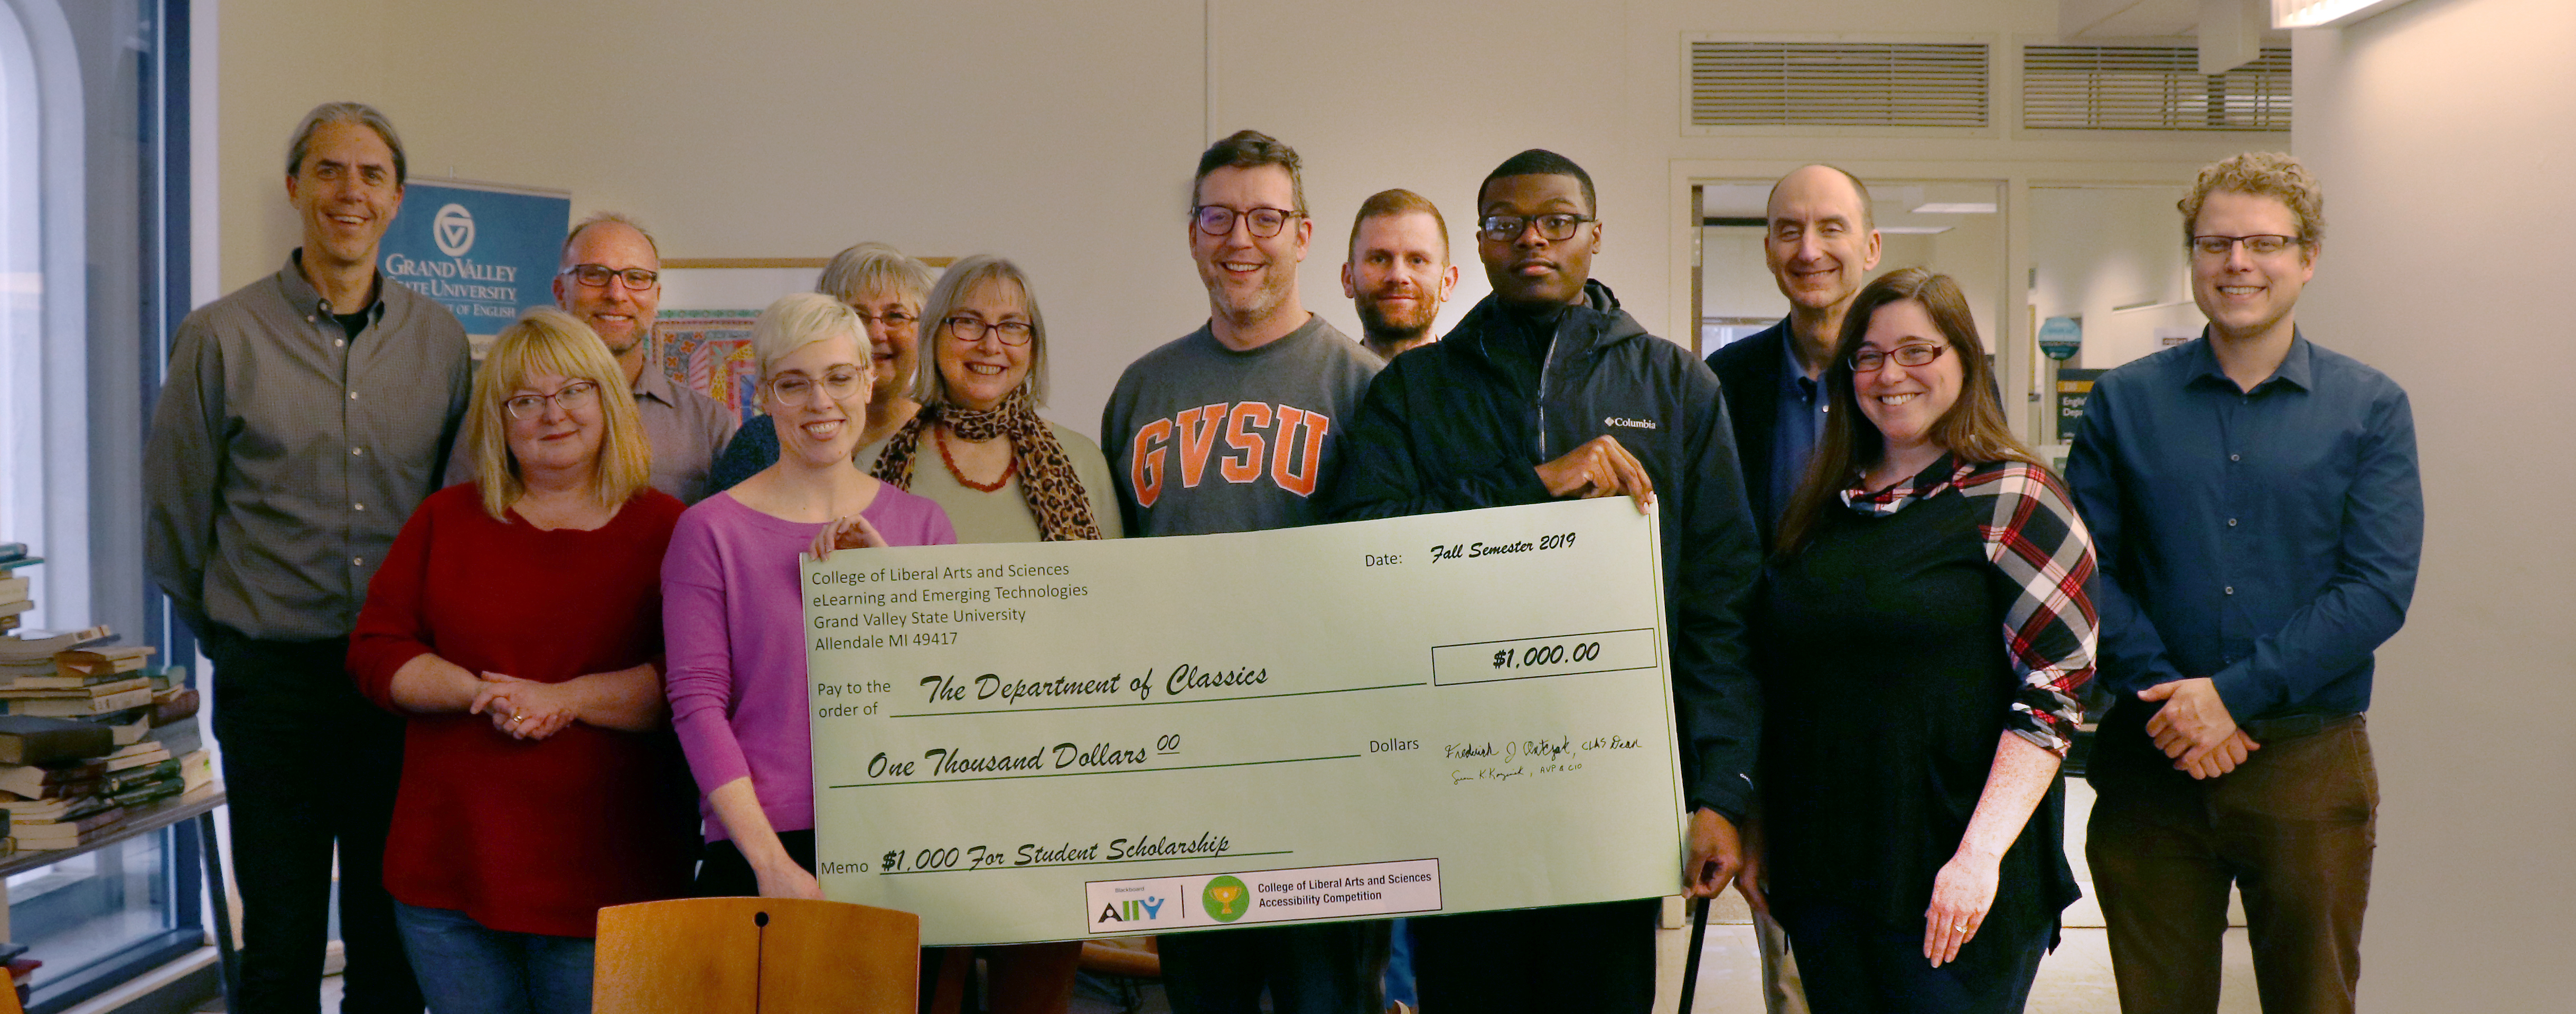 The department of classics staff are pictured holding a large poster check with a total amount of $1,000. The memo of the check is labeled: $1,000 For Student Scholarship.